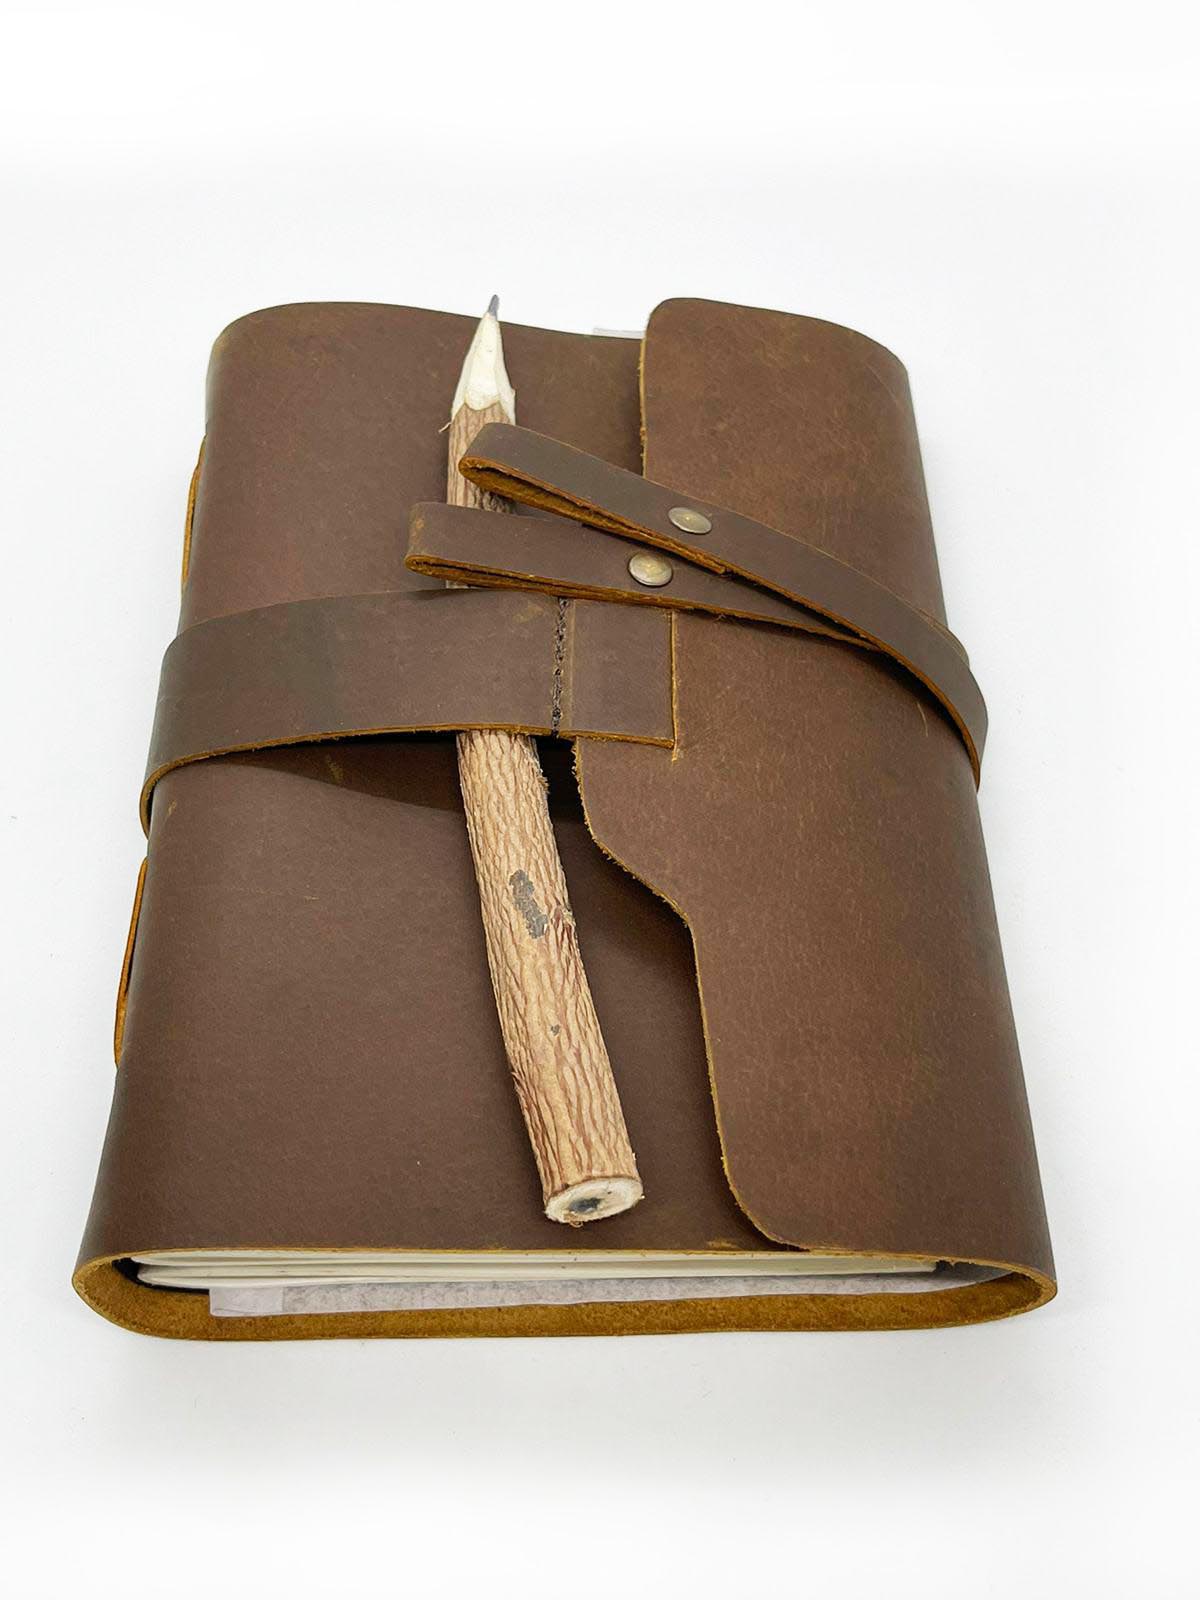 Leather journal 7*5' (MB2)